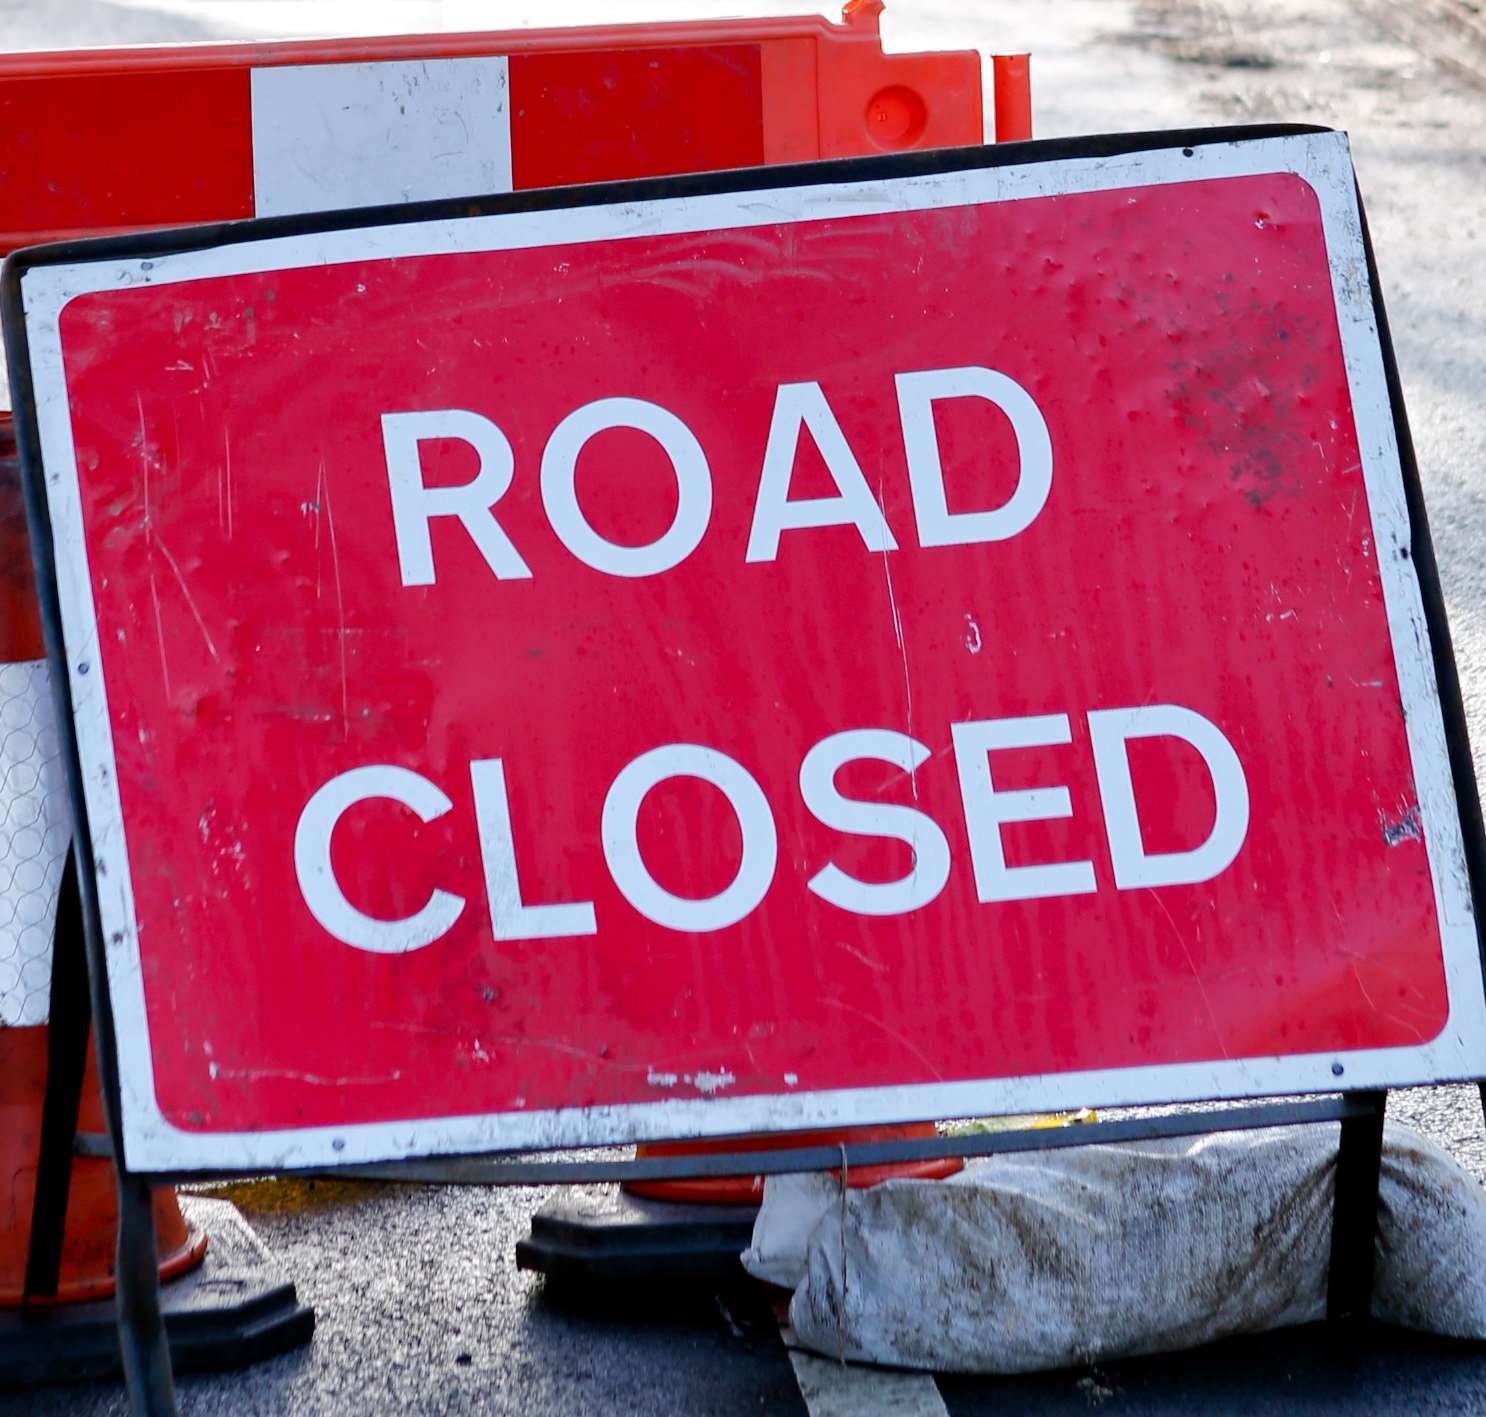 The road will be closed while repairs are made to a burst water main